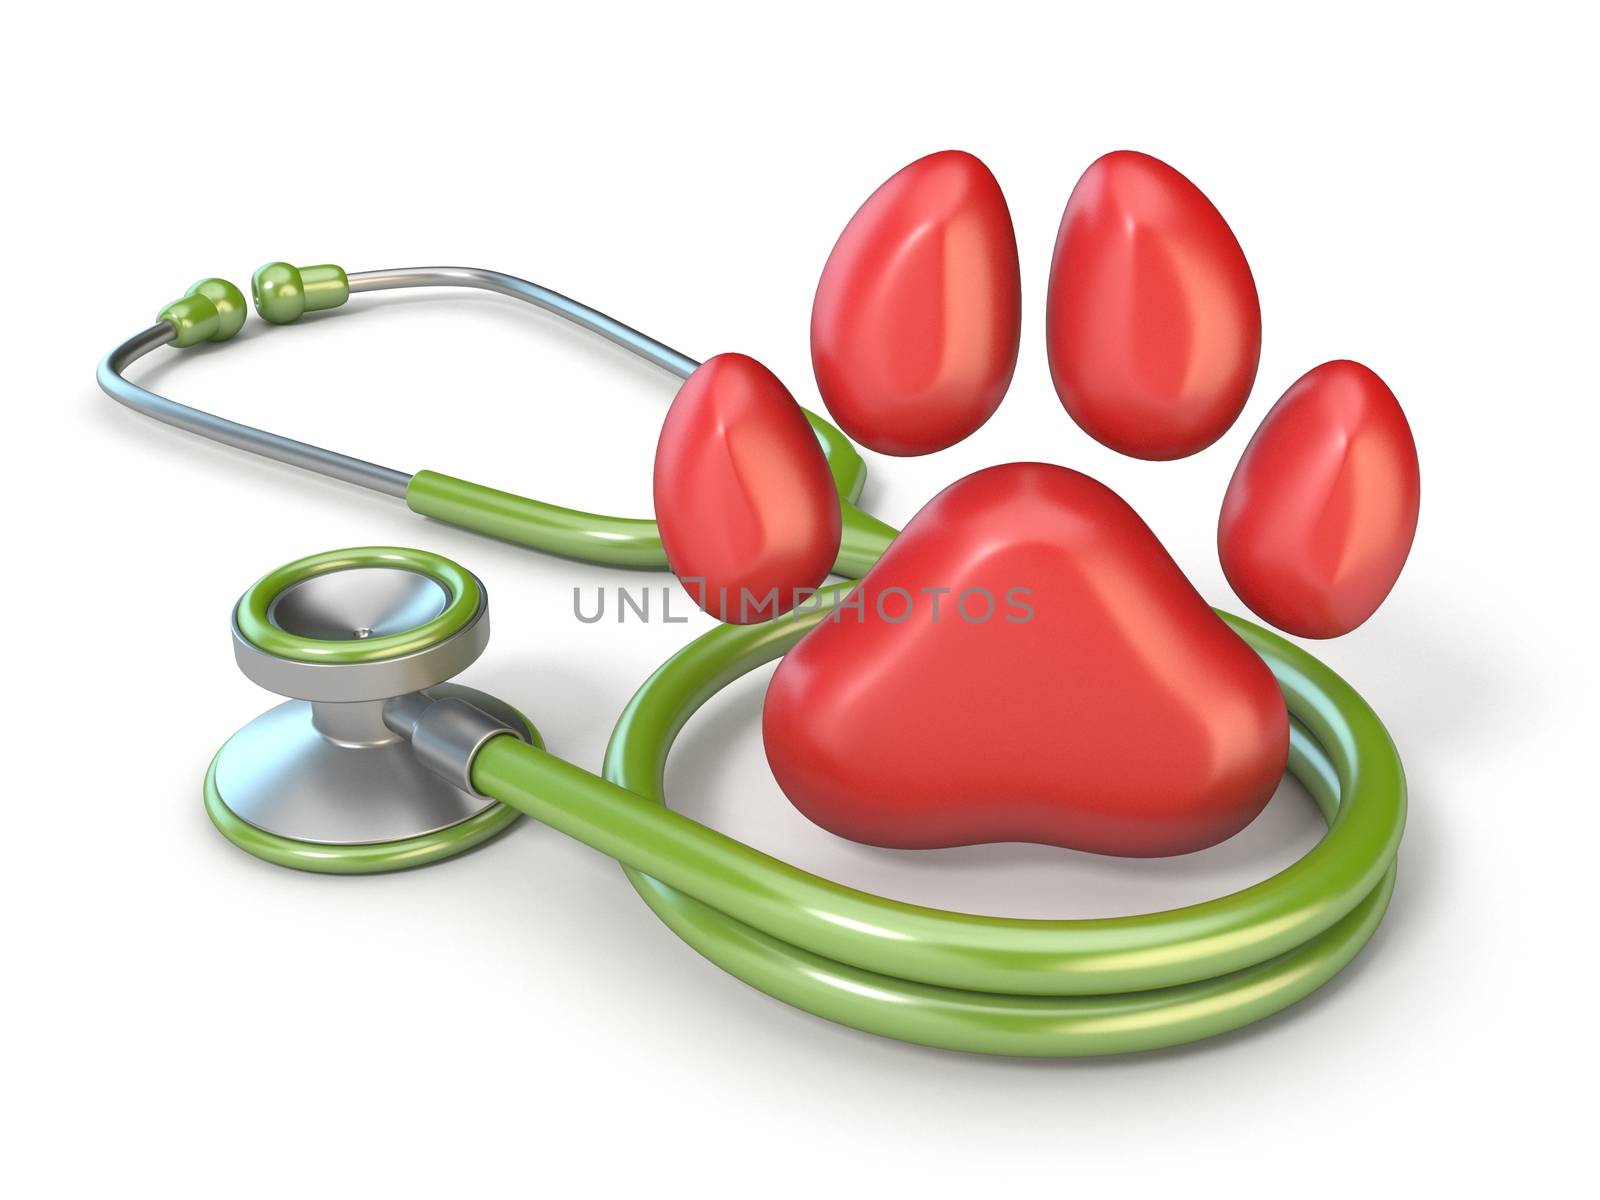 Green stethoscope and red paw 3D3D render illustration isolated on white background